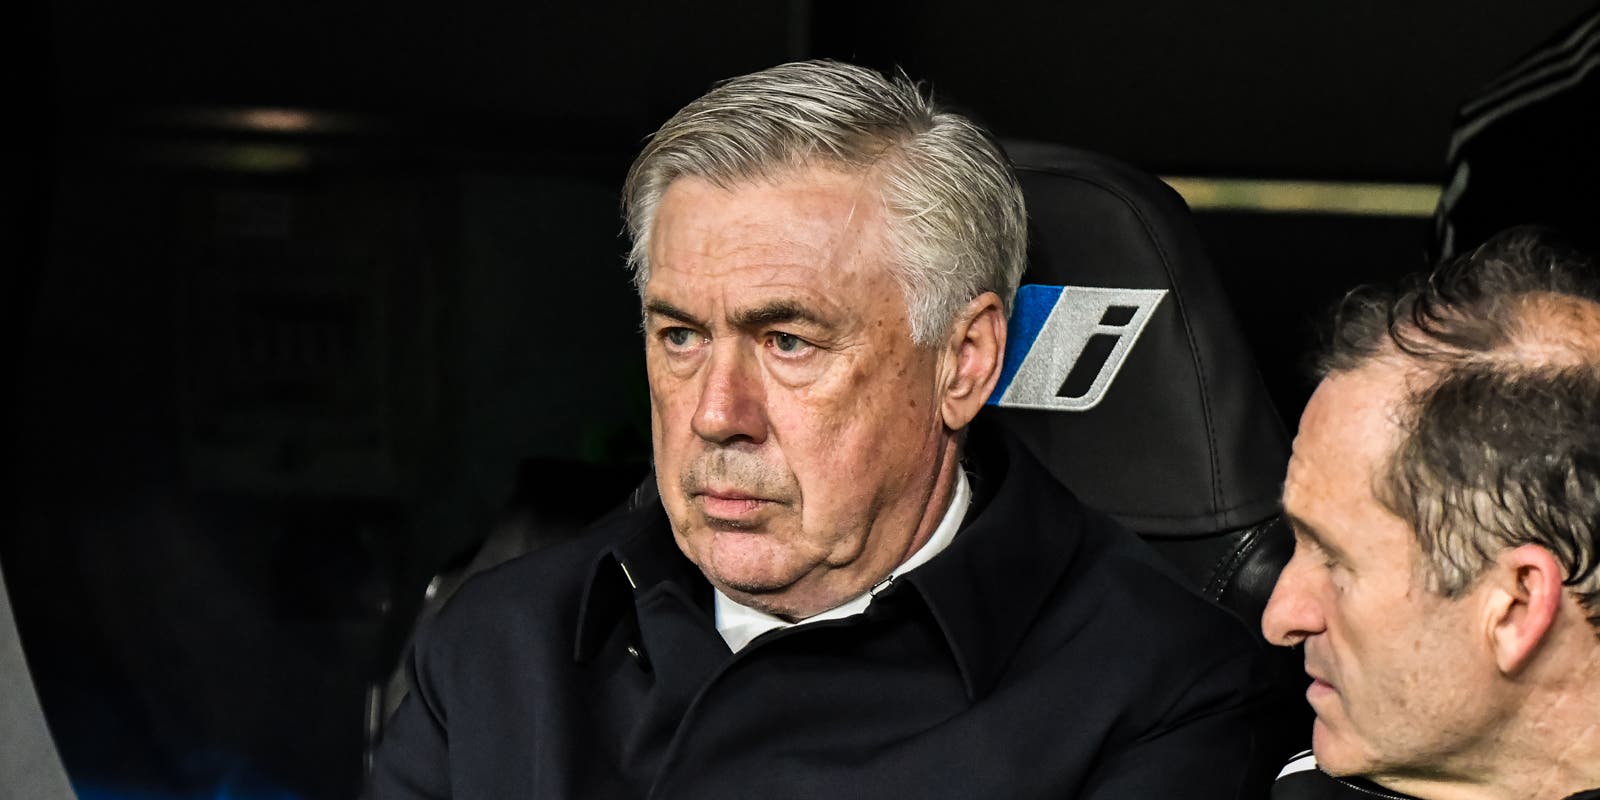 Ancelotti's management is blown up: offer to leave Real Madrid
	
